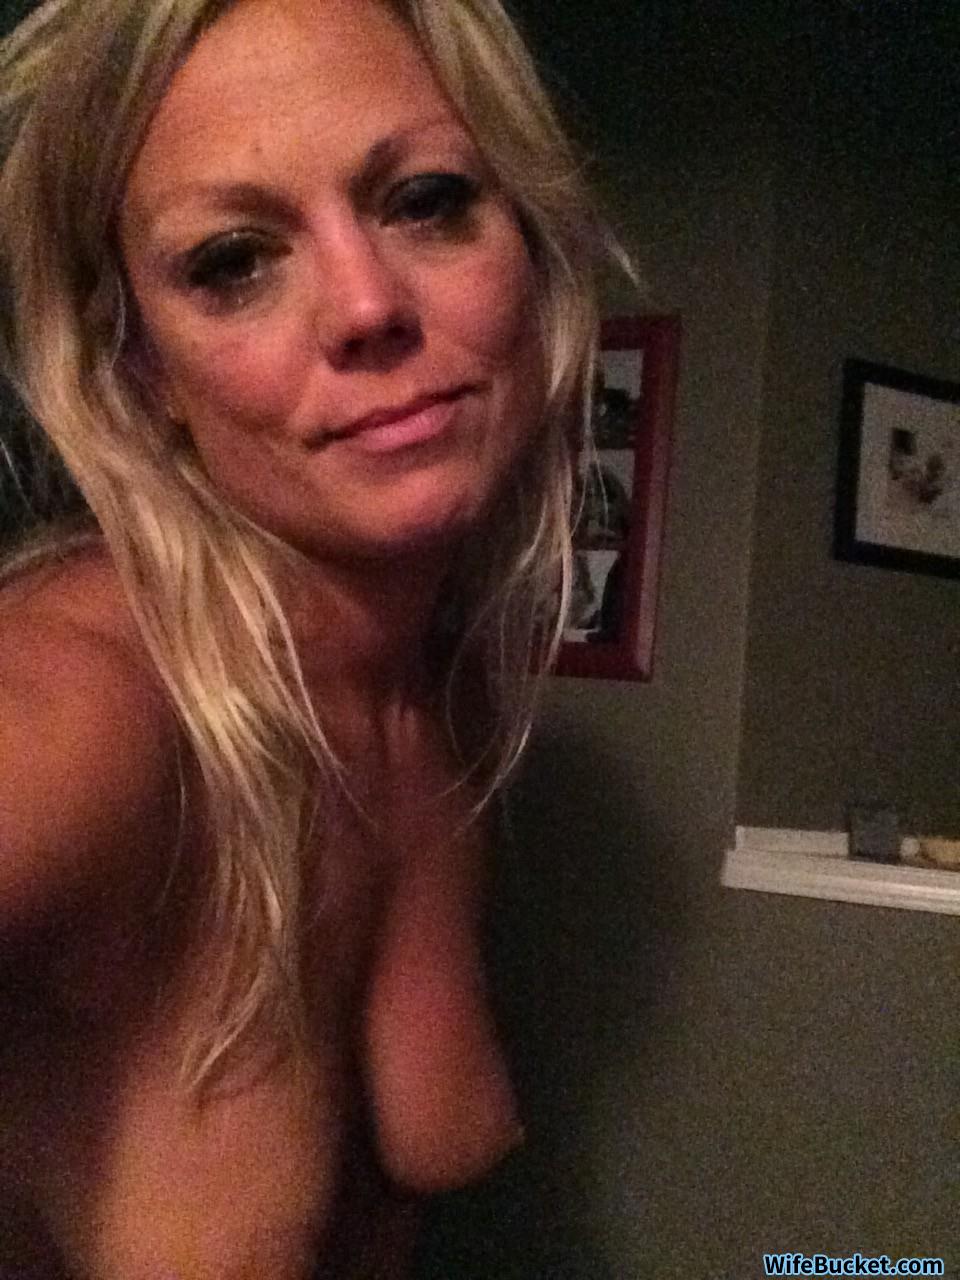 Wifebucket Milf Slut Submitted Nude Selfies And Also